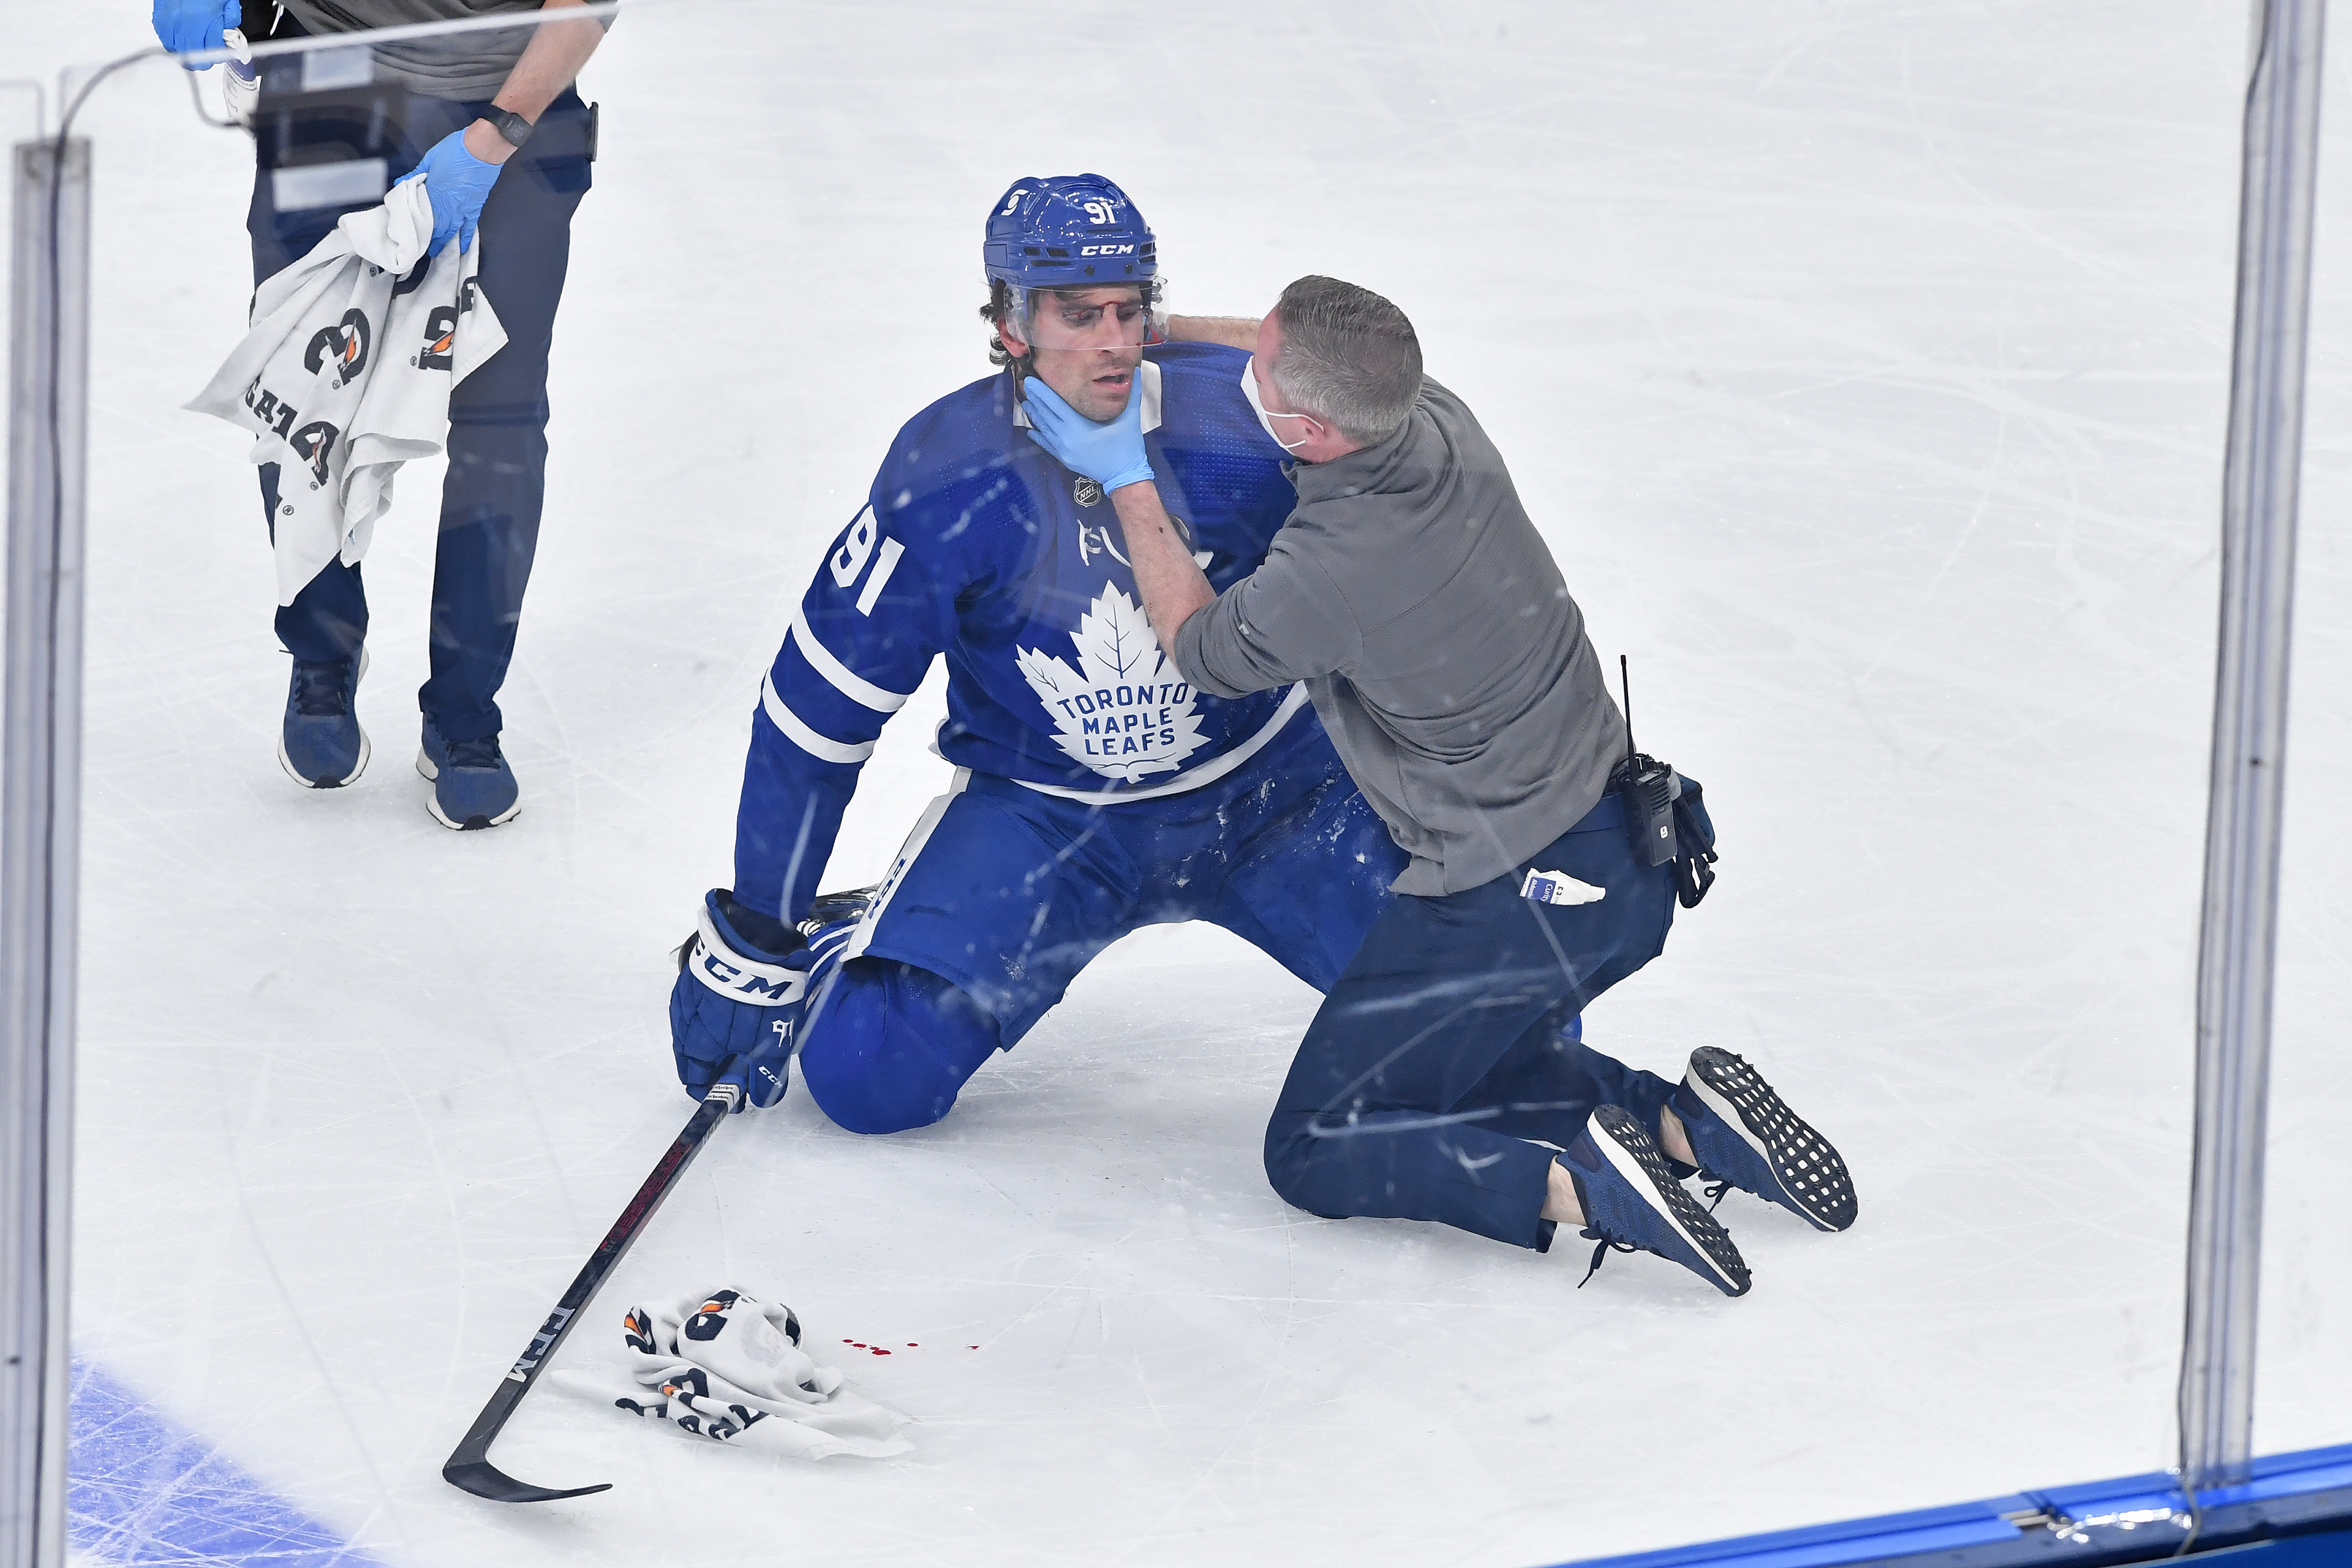 IN PHOTOS: John Tavares faces off against Leafs teammate in